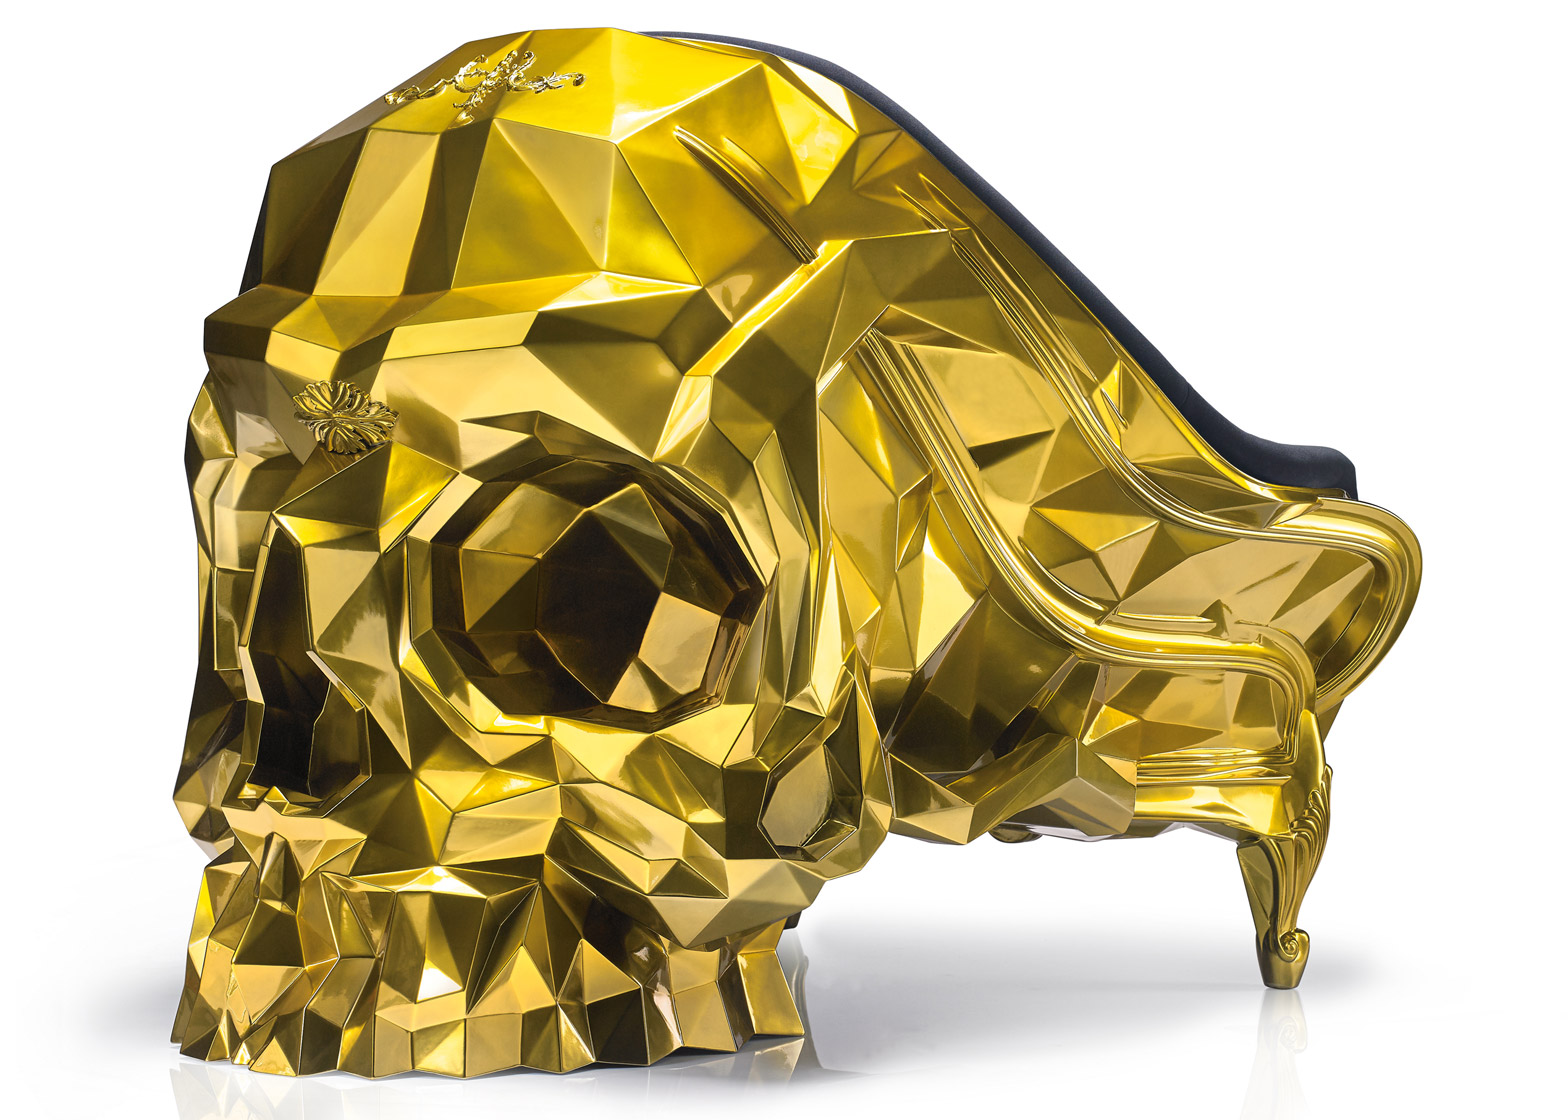 Harow S Gold Plated Skull Armchair Carries A 500k Price Tag